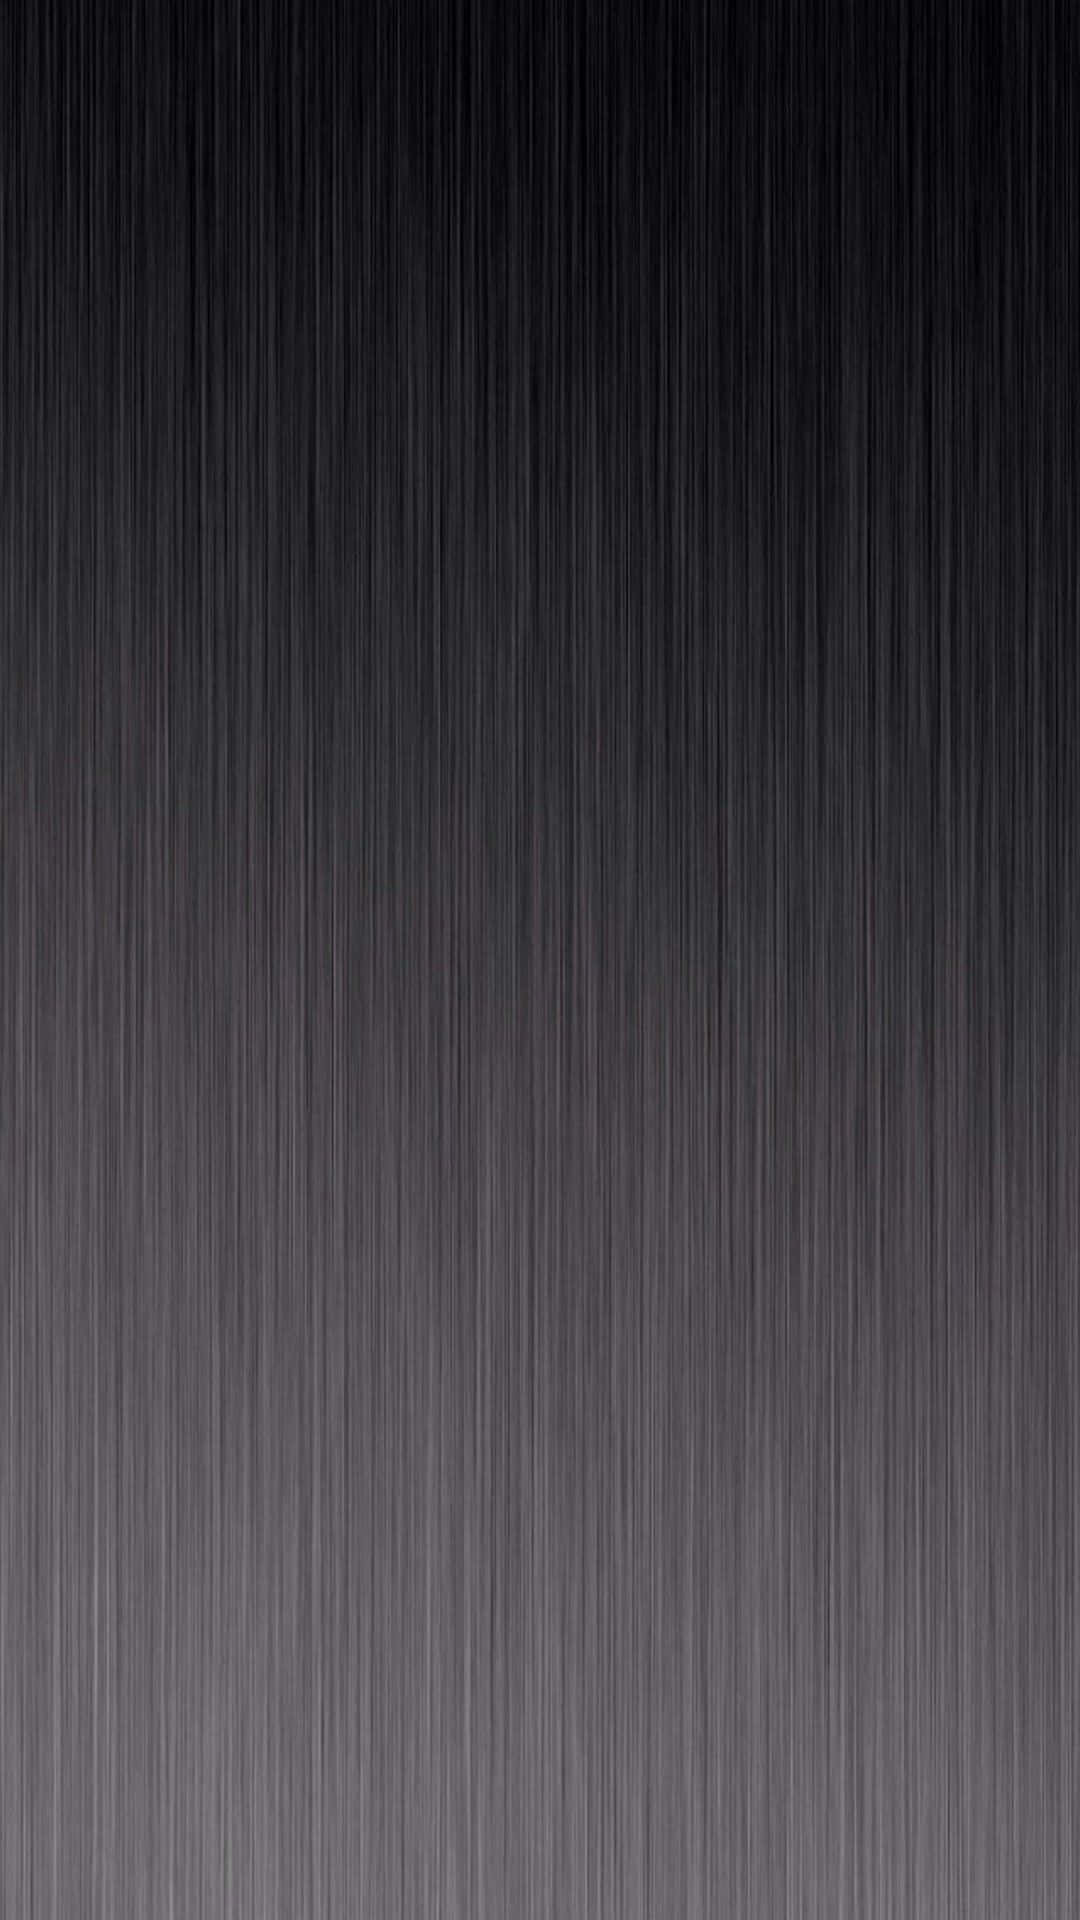 A Black And White Background With A Black And White Line Wallpaper